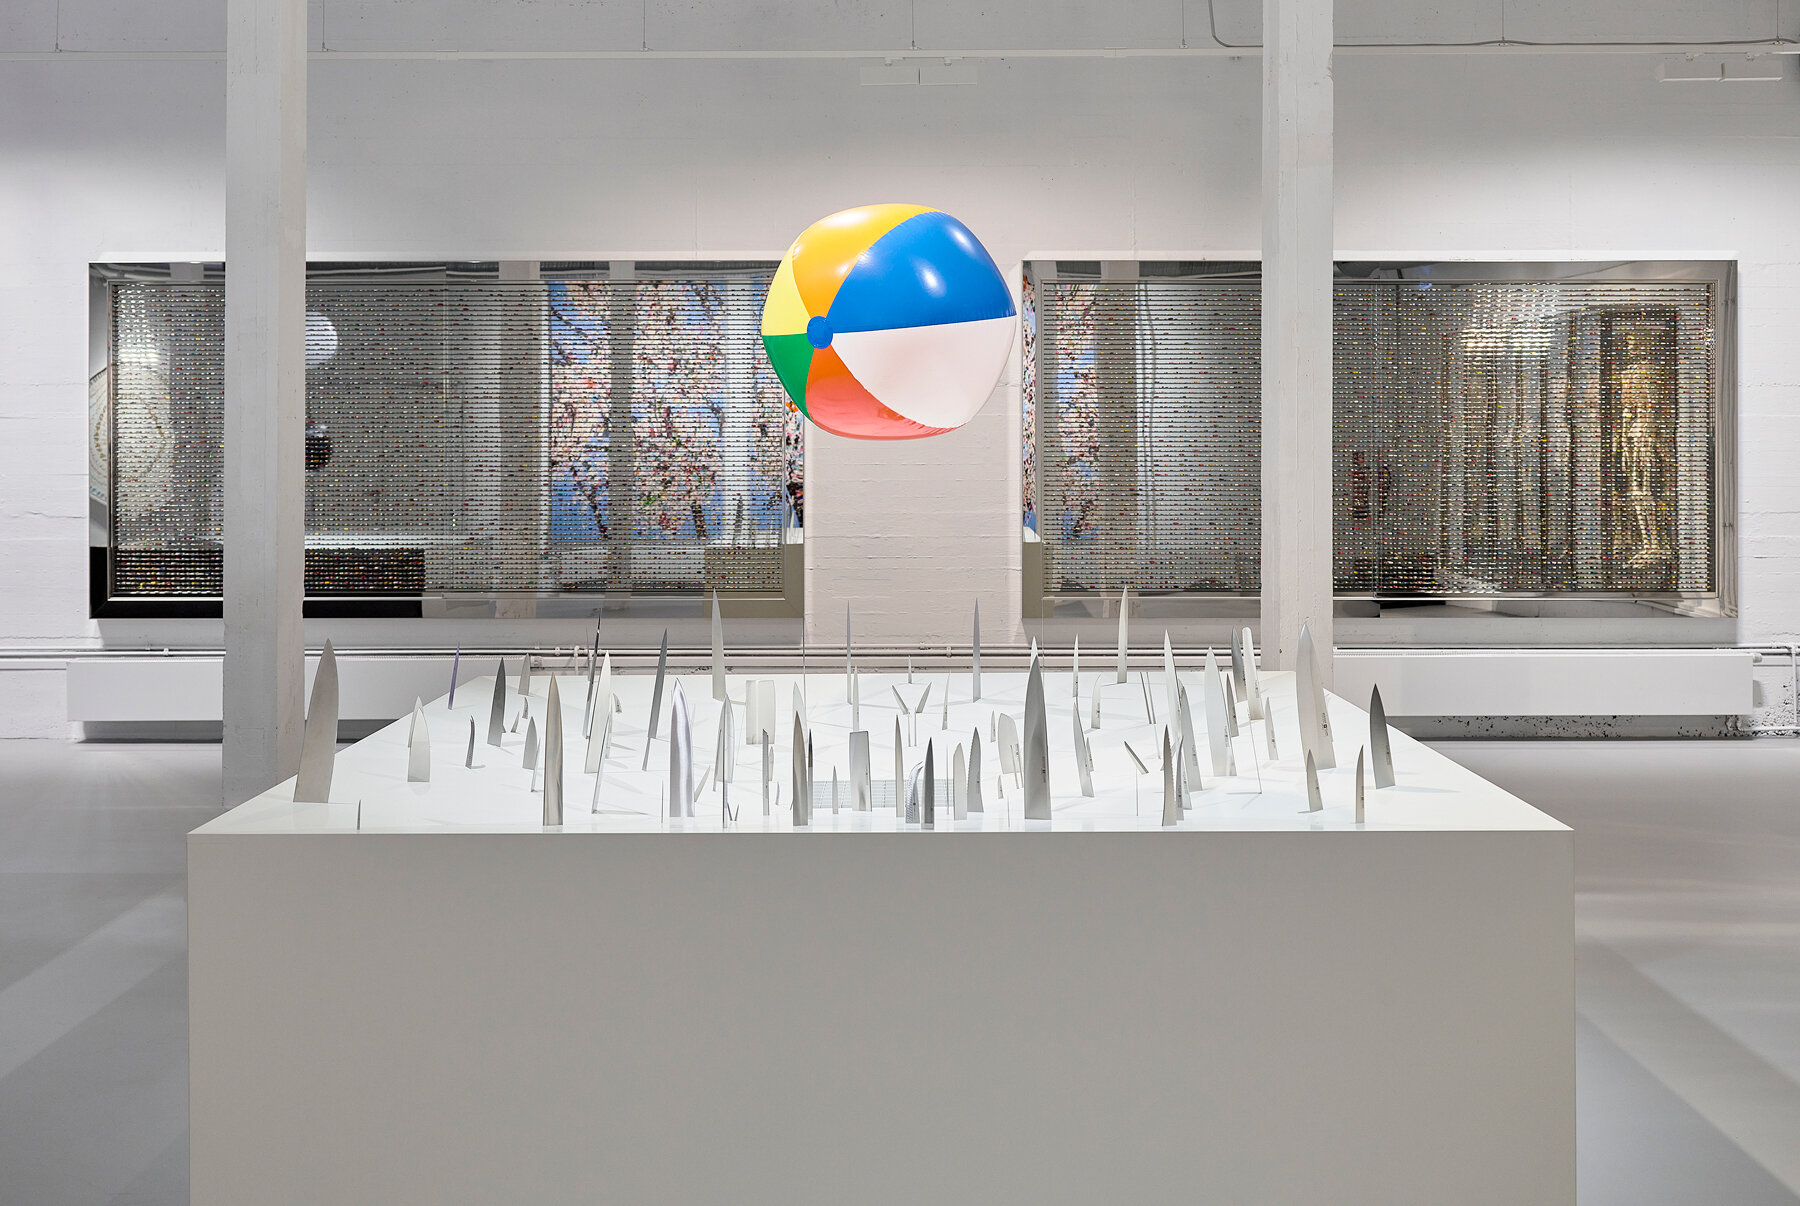 muca-opens-damien-hirsts-first-major-survey-exhibition-in-germany-designboom-1800